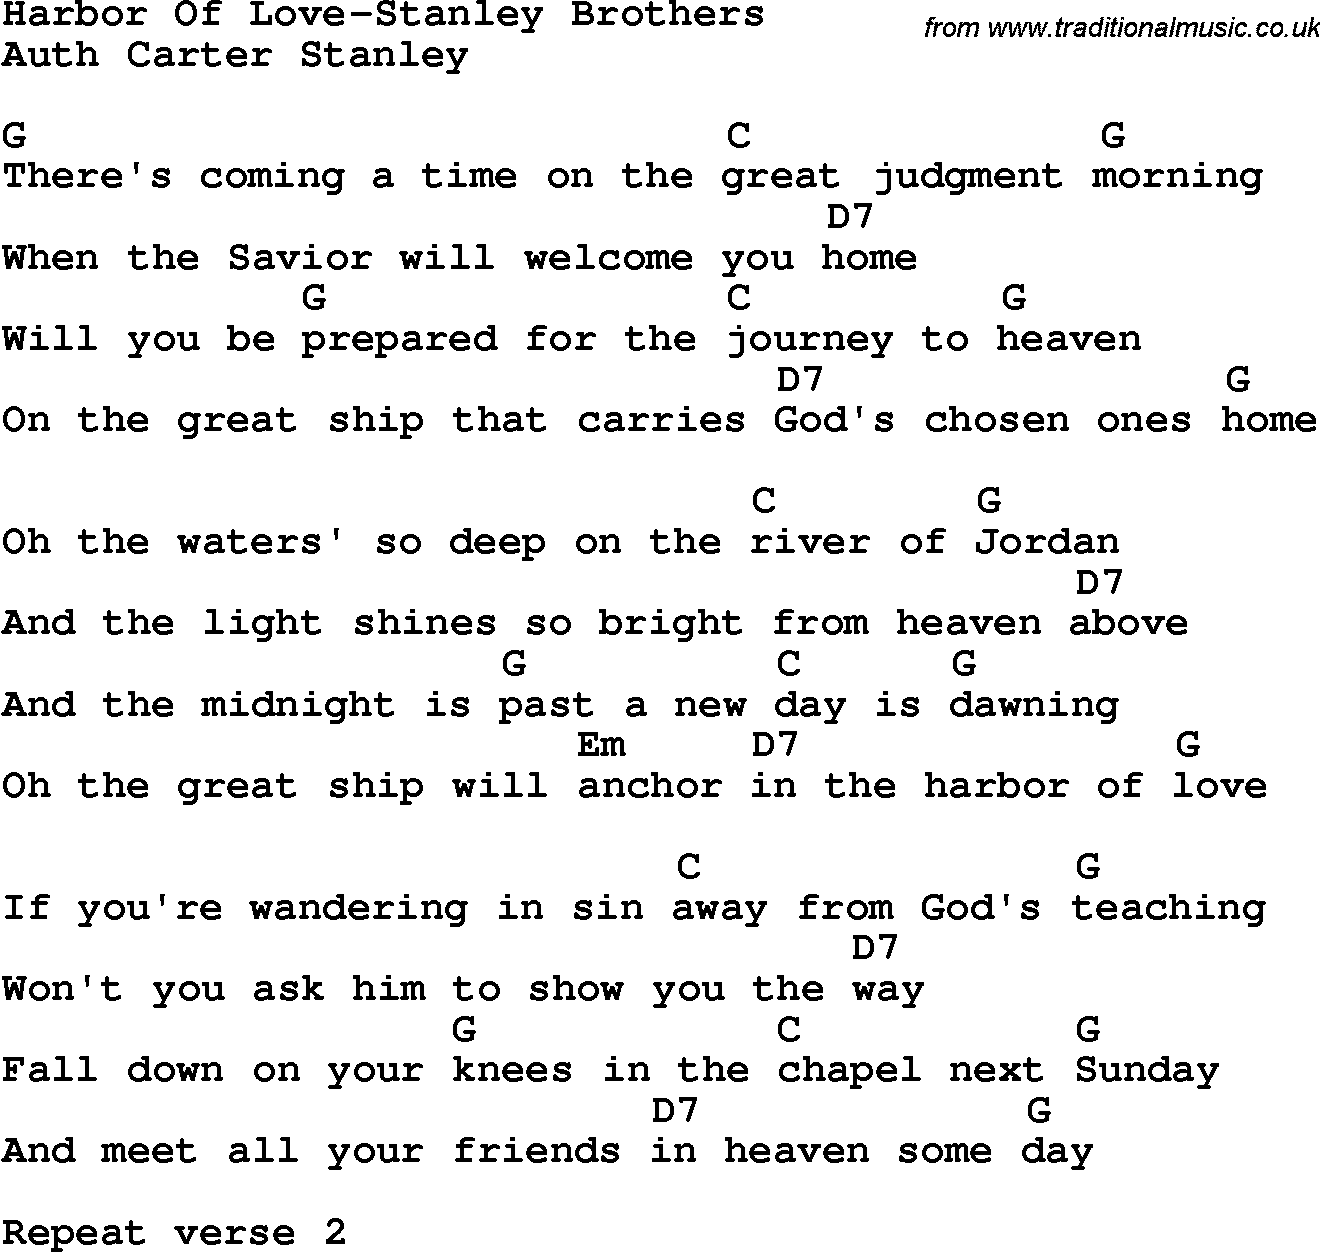 Country, Southern and Bluegrass Gospel Song Harbor Of Love-Stanley Brothers lyrics and chords